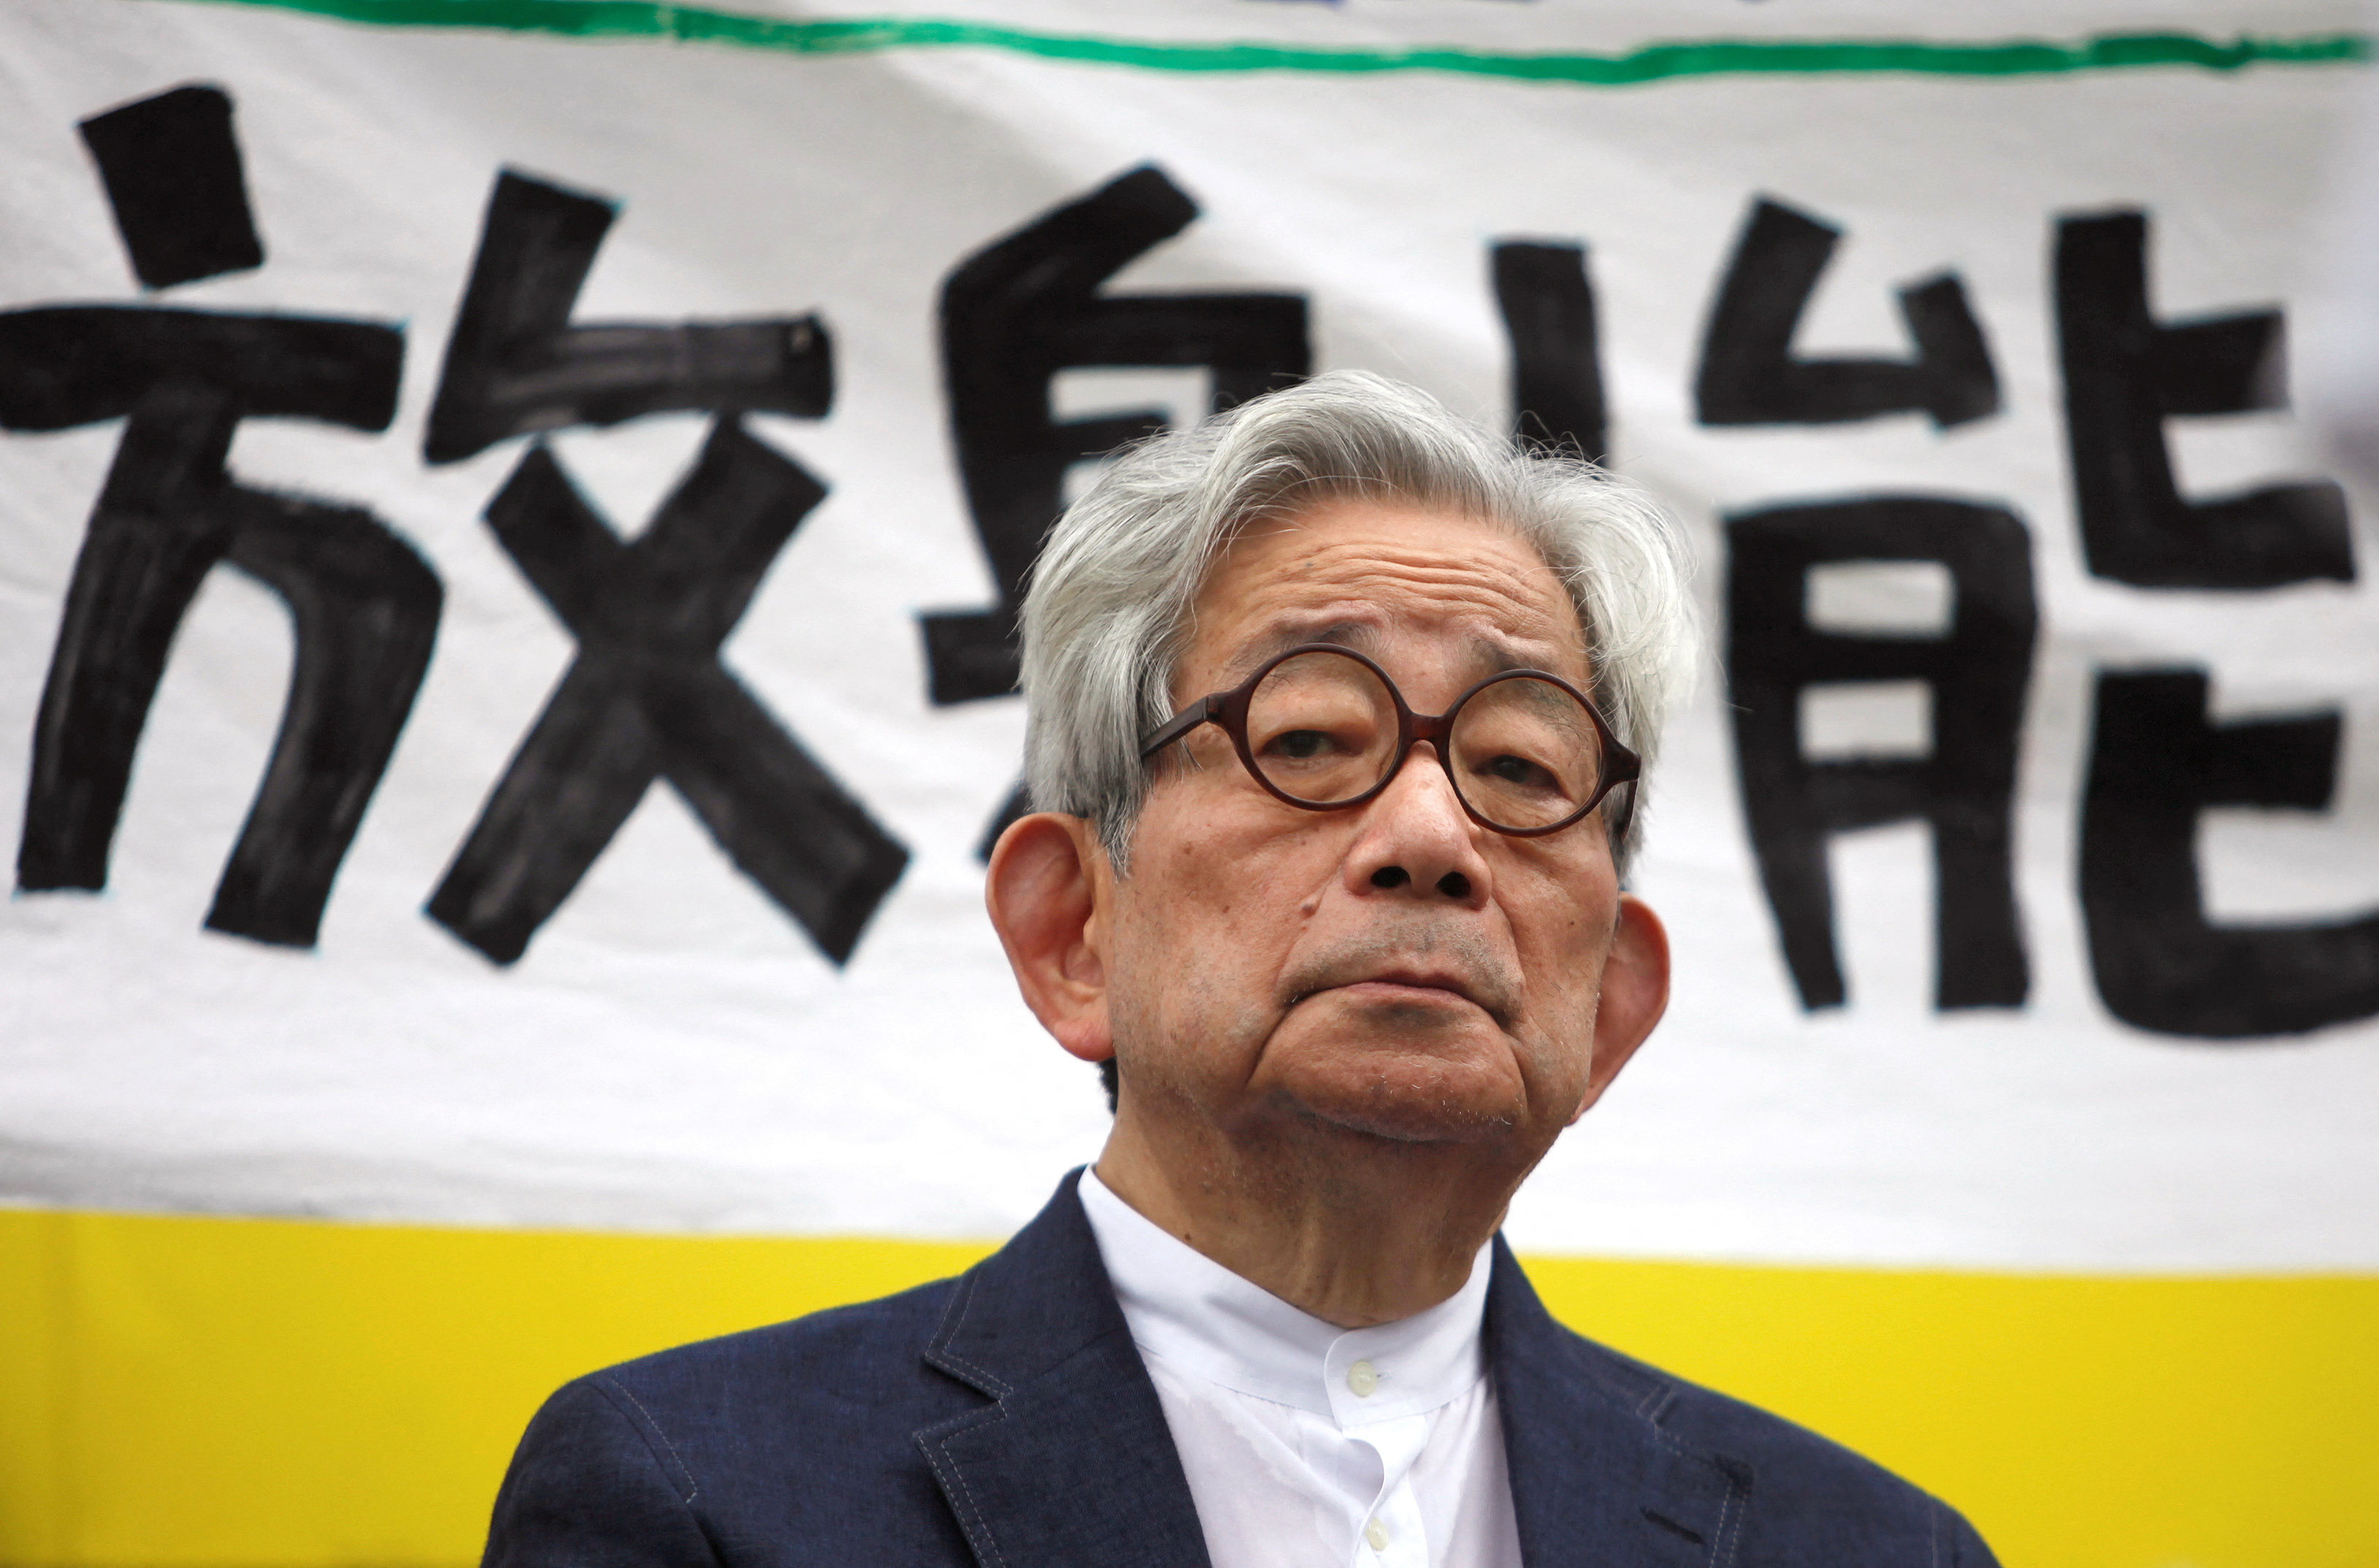 Japanese Nobel literature prize winner Kenzaburo Oe sits in front of a banner reading “radiation” during an anti-nuclear gathering in Tokyo, Japan on September 19, 2011. Photo: Reuters